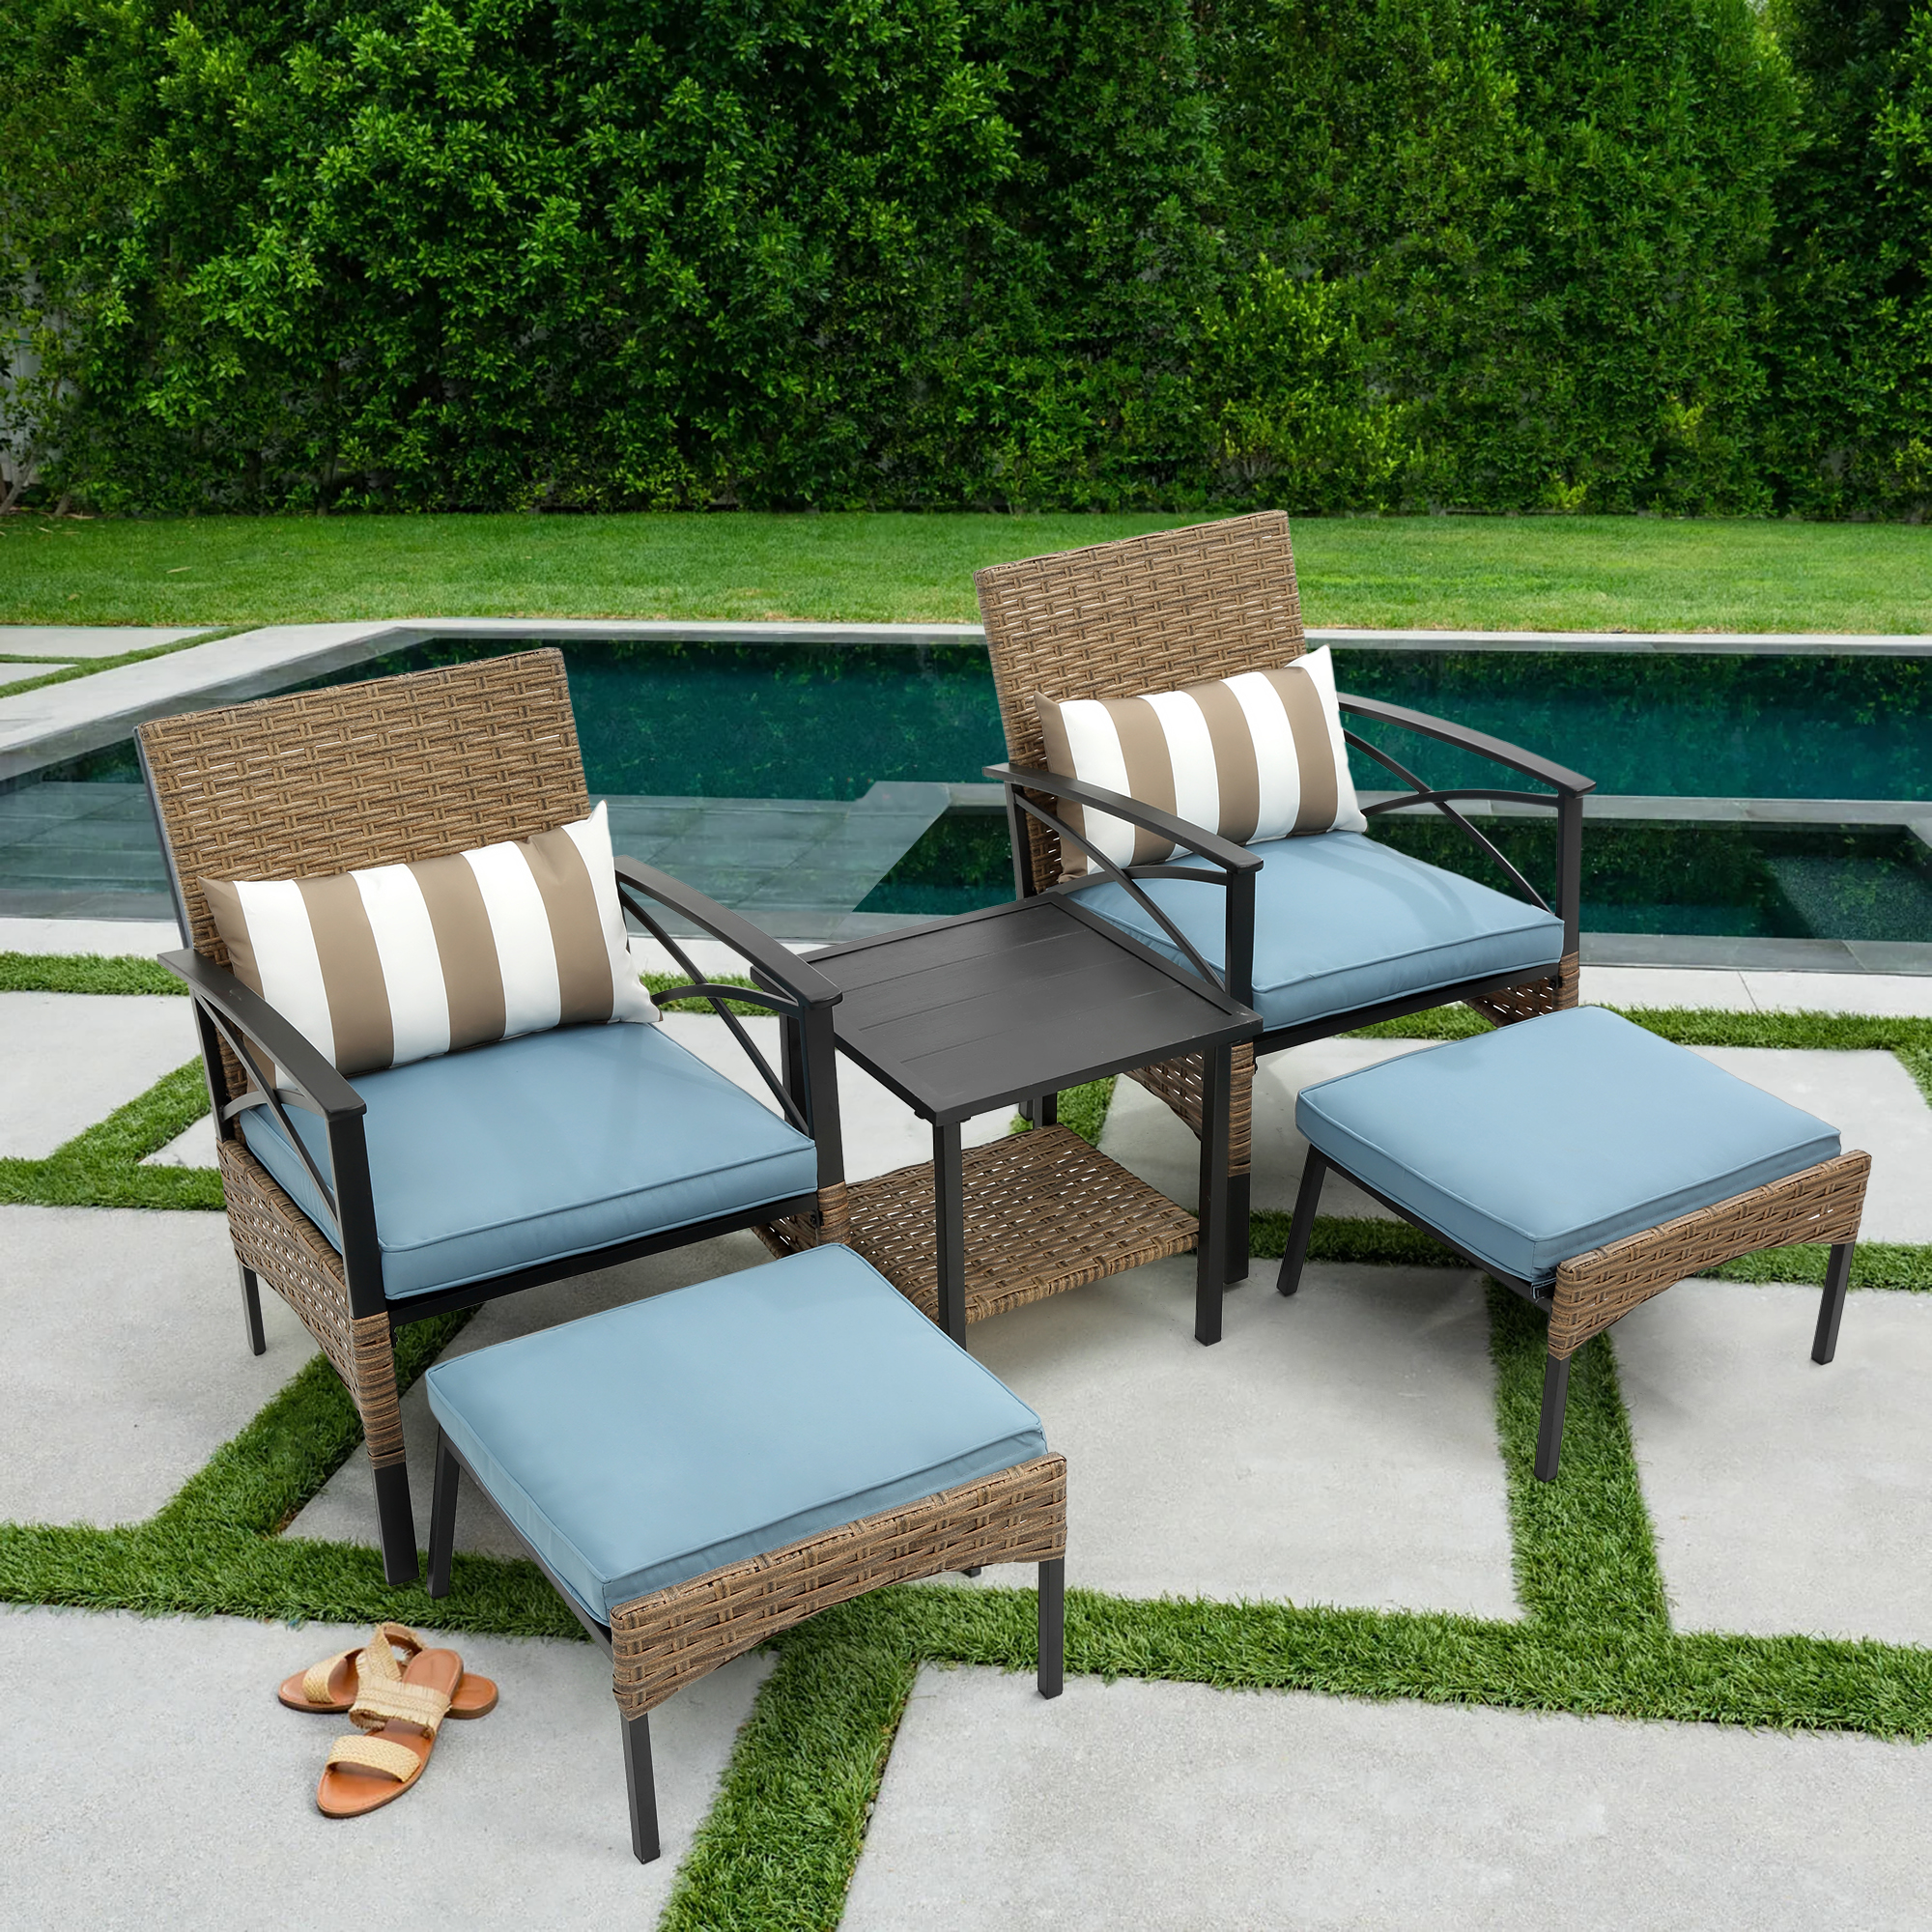 SYNGAR 5 Piece Outdoor Patio Furniture Set, PE Rattan Sectional Furniture Set with Coffee Table, Cushioned Chair and Ottoman, Patio Conversation Sofa Set, for Garden, Yard, Deck, Poolside, Blue, D1067 - image 1 of 10